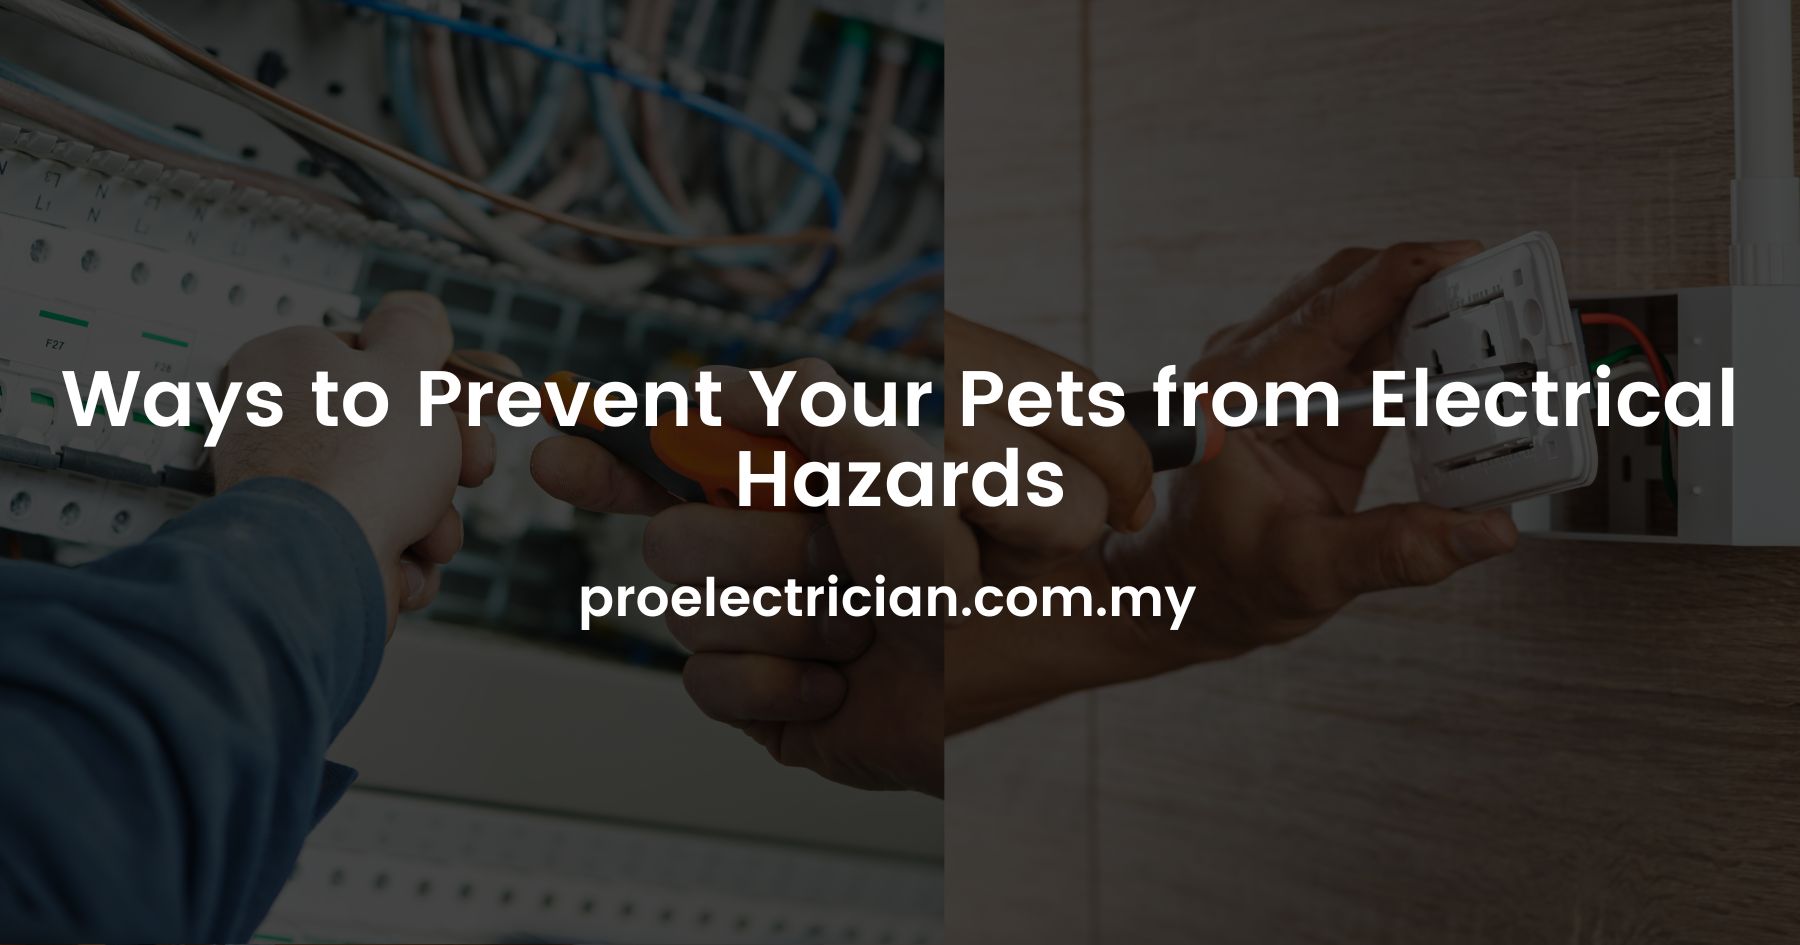 Ways to Prevent Your Pets from Electrical Hazards